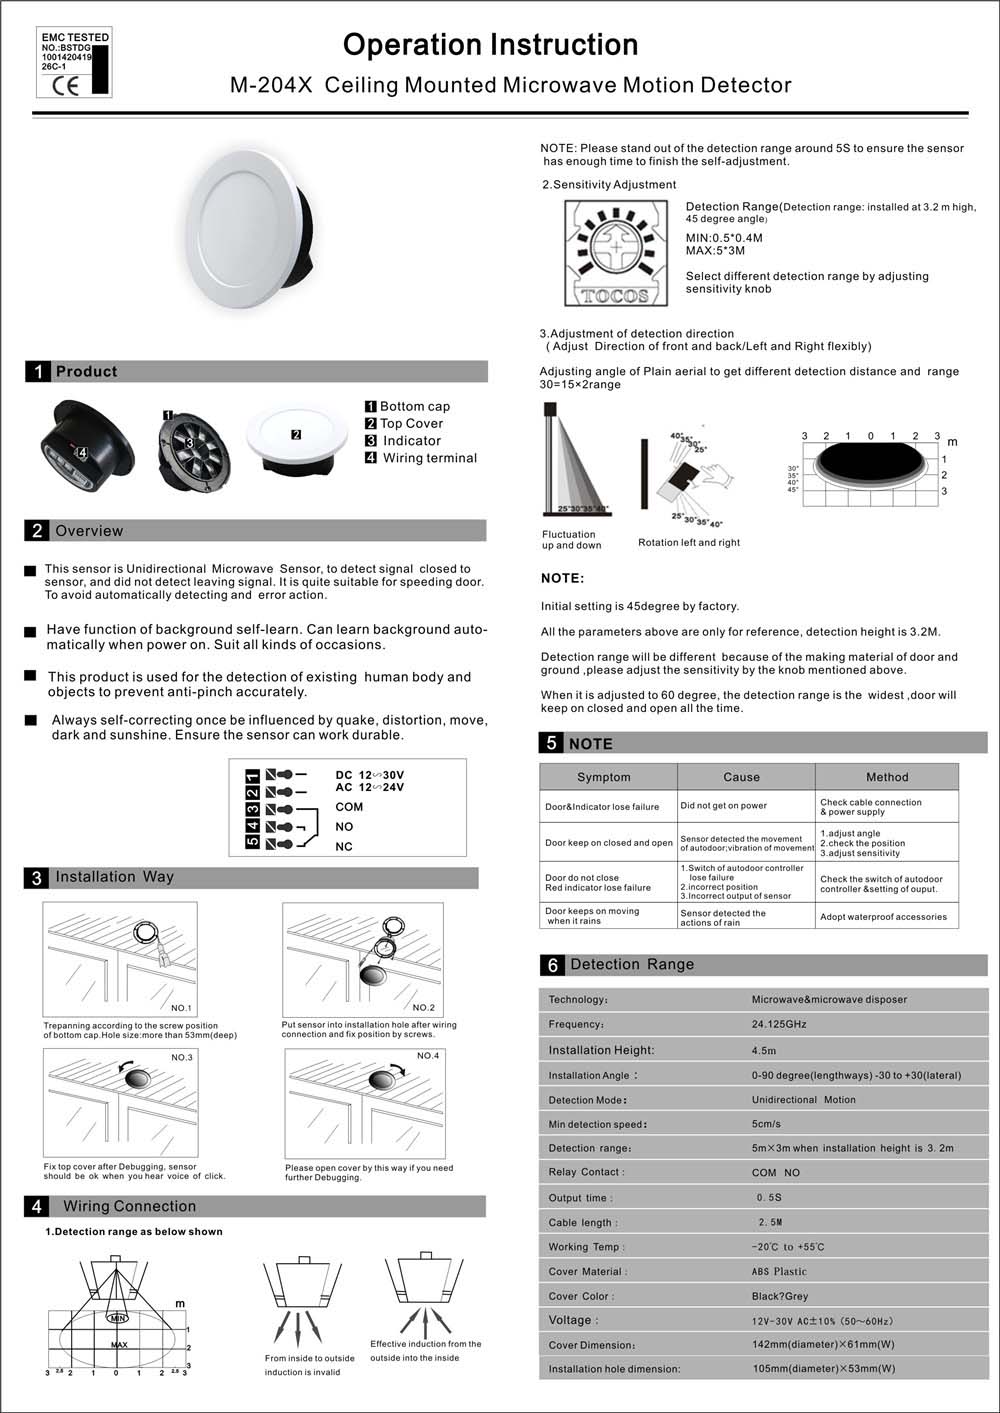 M-204X Celing Mounted Microwave Motion Detector